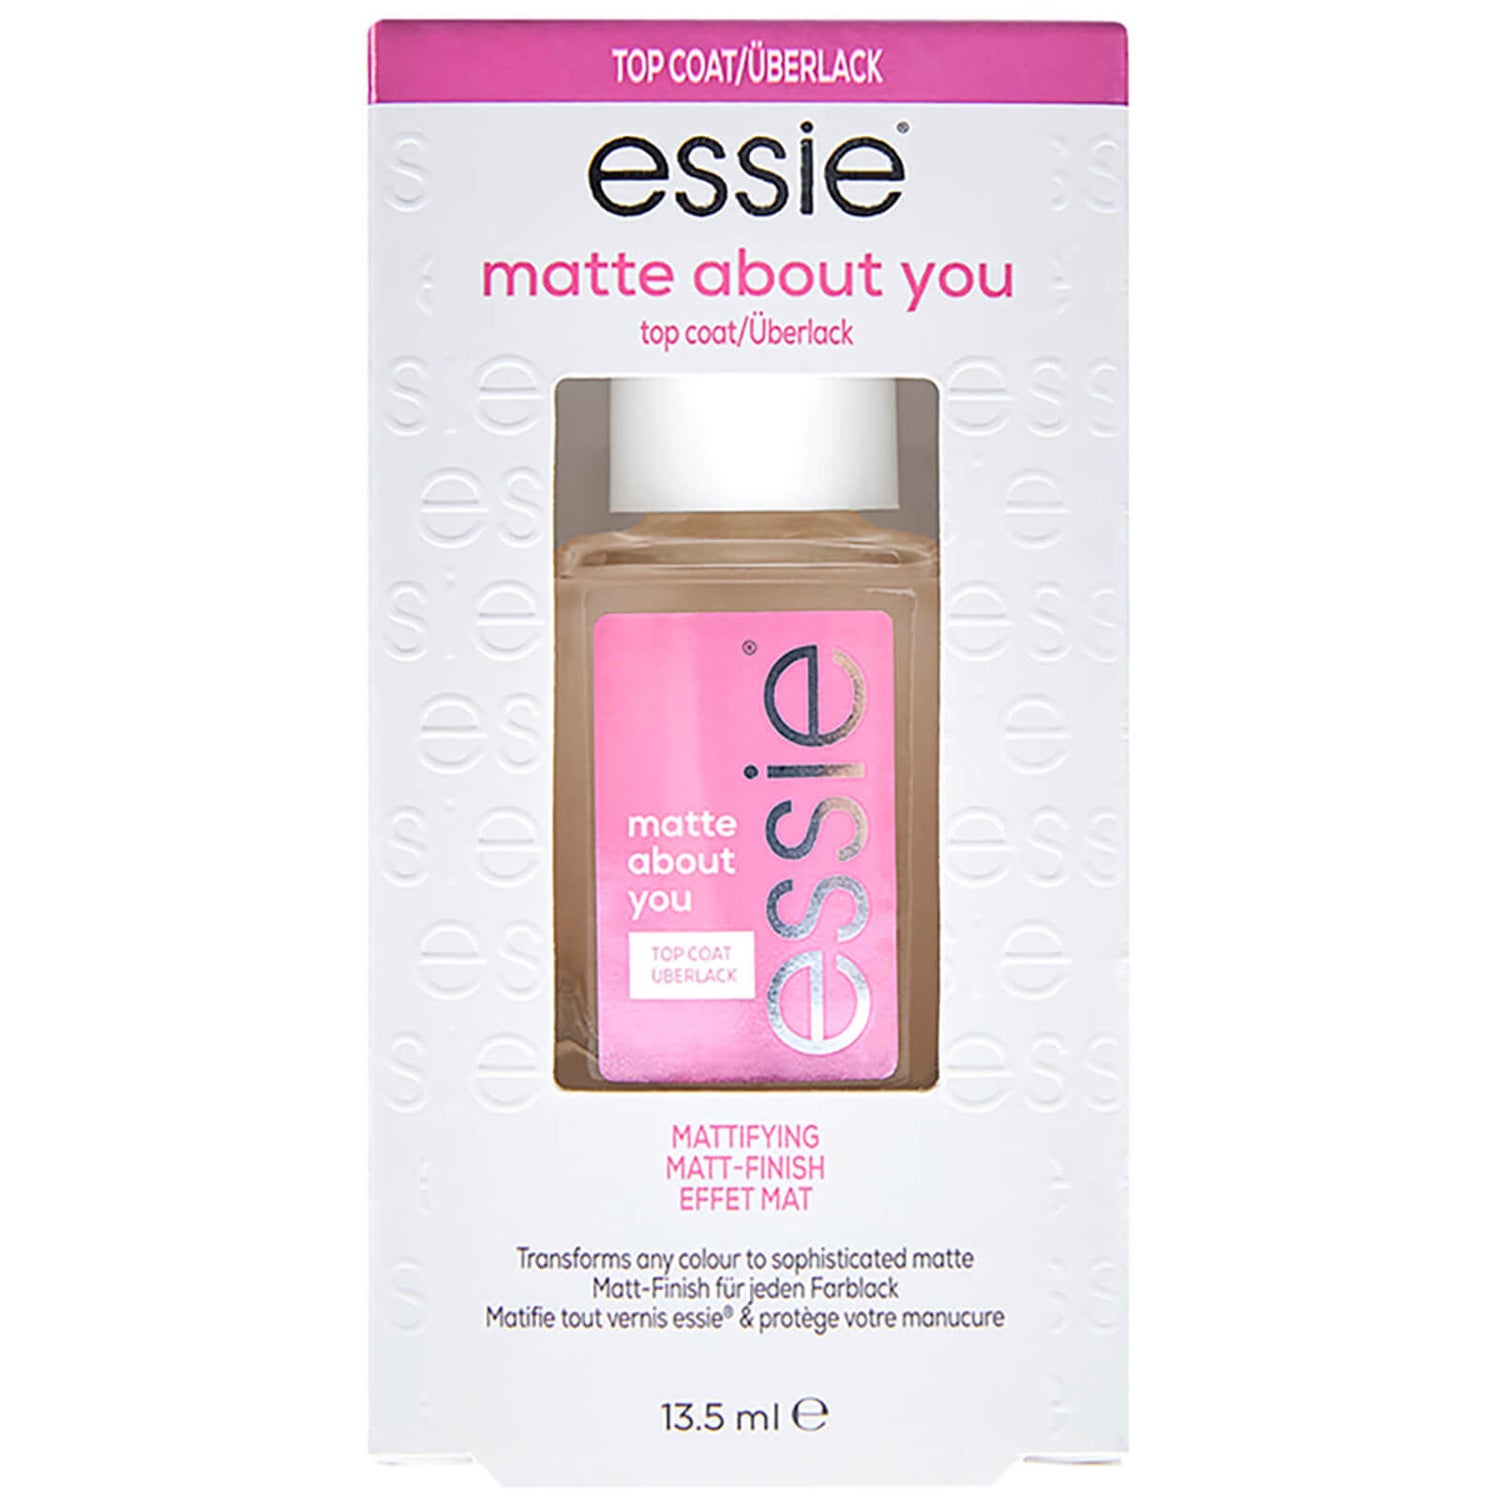 essie Nail Care Matte About You Nail Polish Top Coat